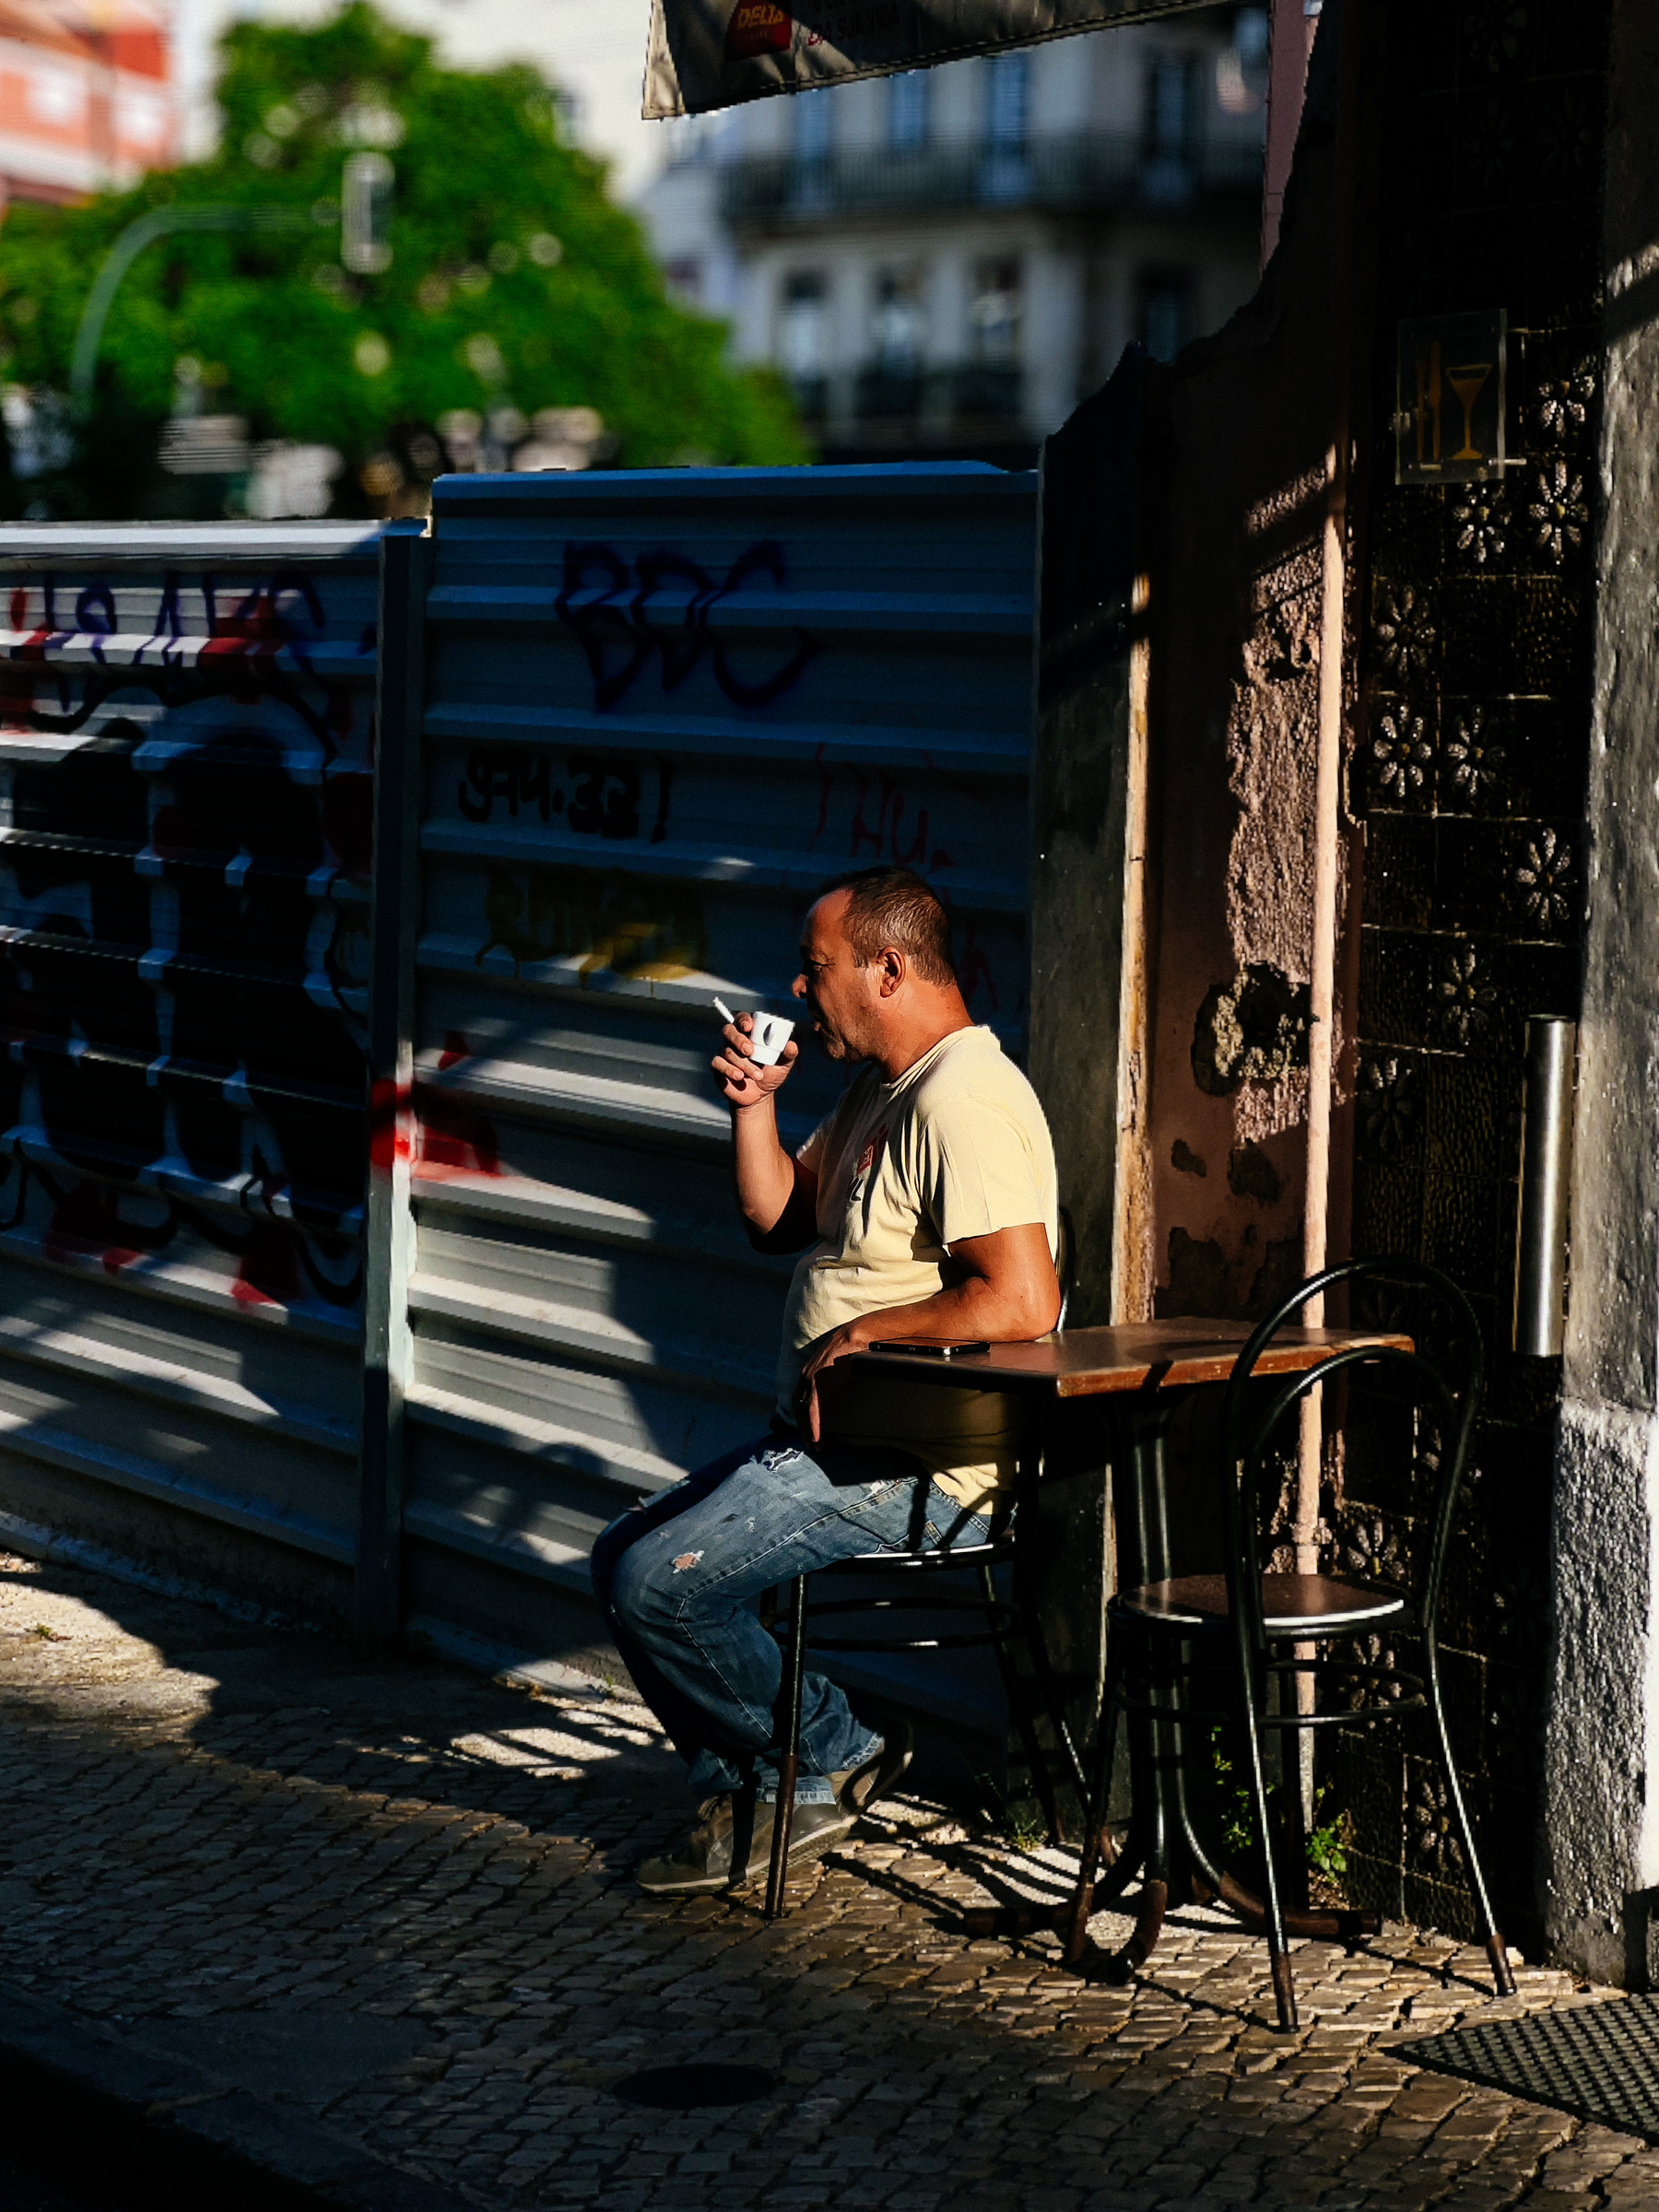 A man sits alone having his morning coffee on a table outside a small cafe, near a construction site.